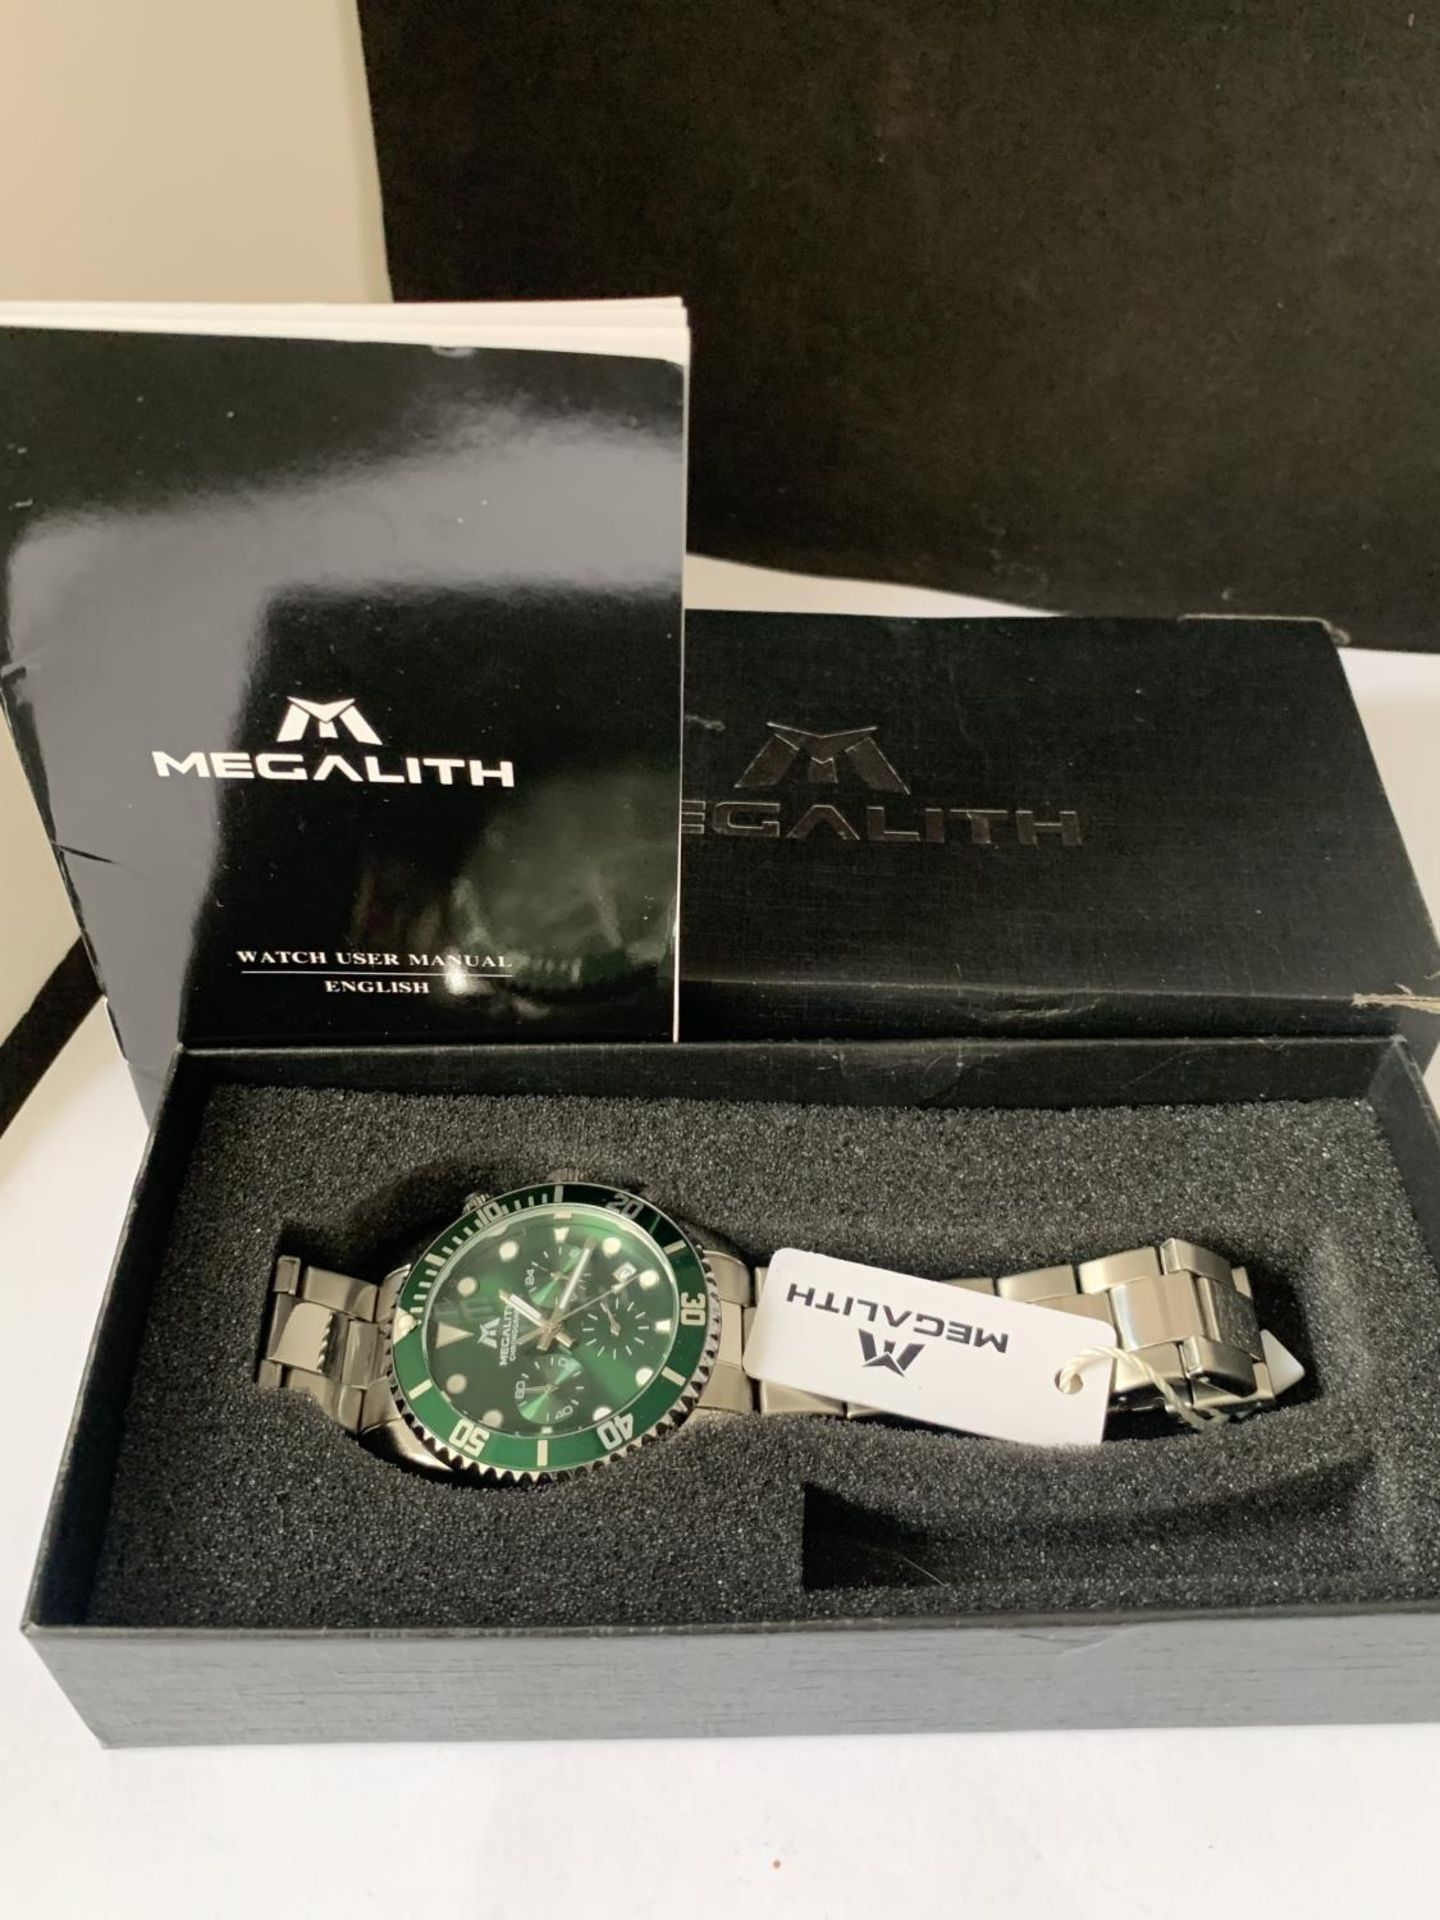 AN AS NEW AND BOXED MEGALITH CHRONOGRAPH WRIST WATCH SEEN WORKING BUT NO WARRANTY